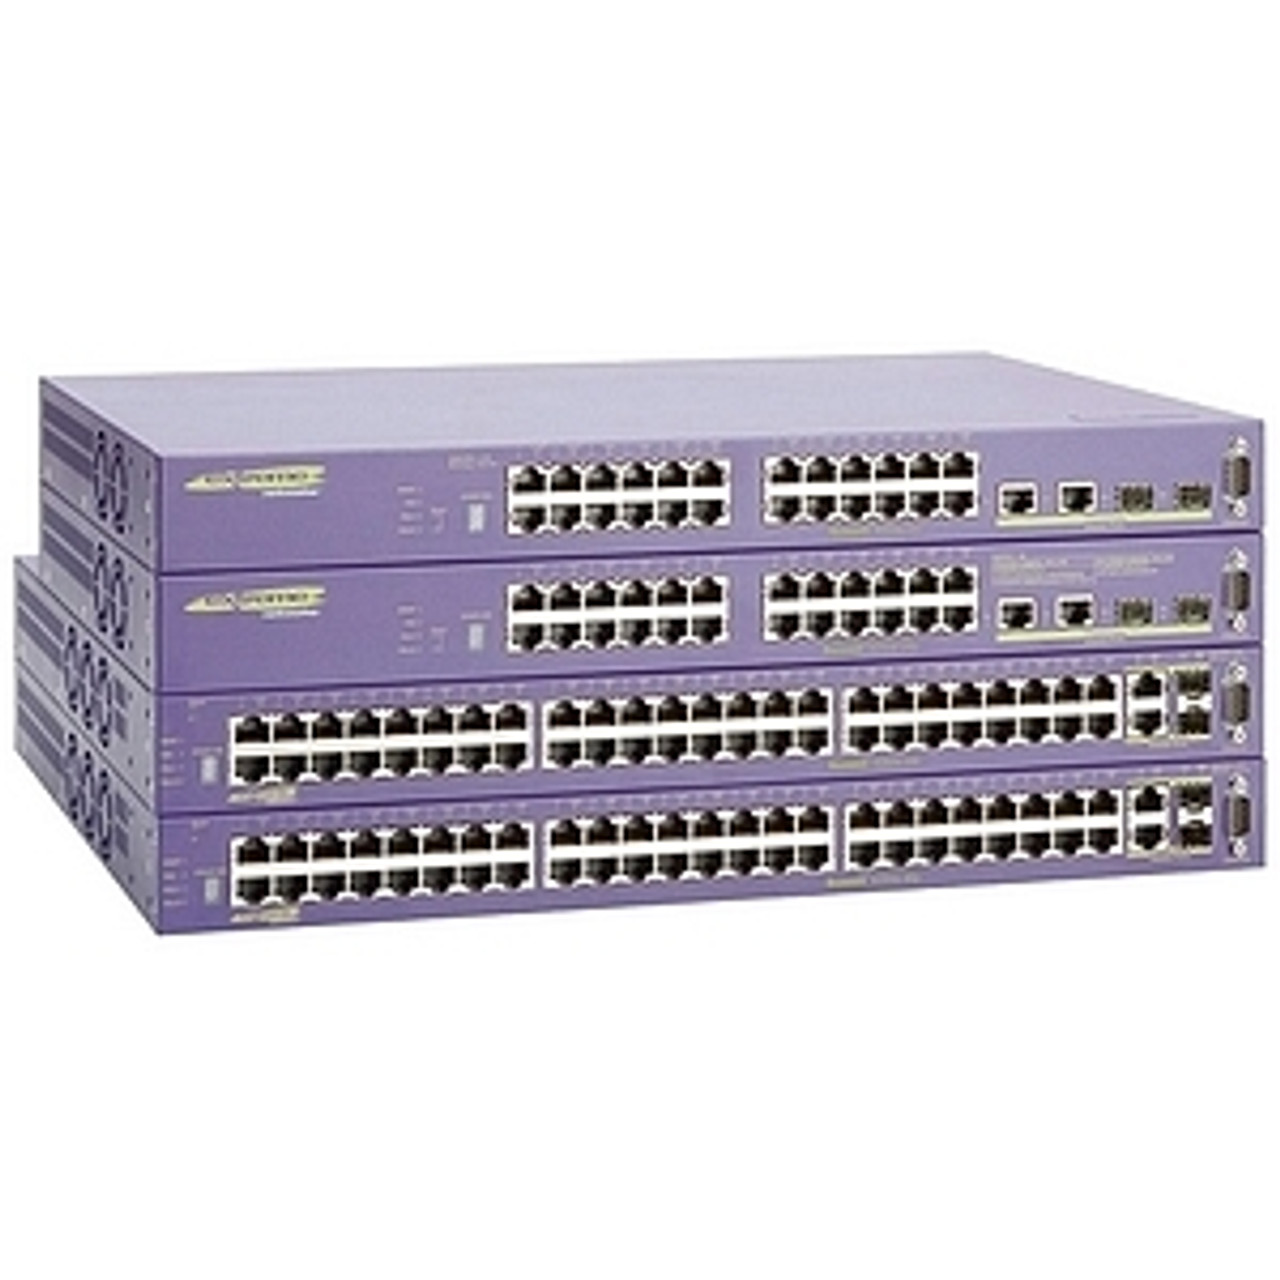 15105 Extreme Networks Summit X250e-24p 24-Ports Stackable Multilayer Ethernet Switch with PoE 24 x 10/100Base-TX, 2 x 10/100/1000Base-T, 2 x